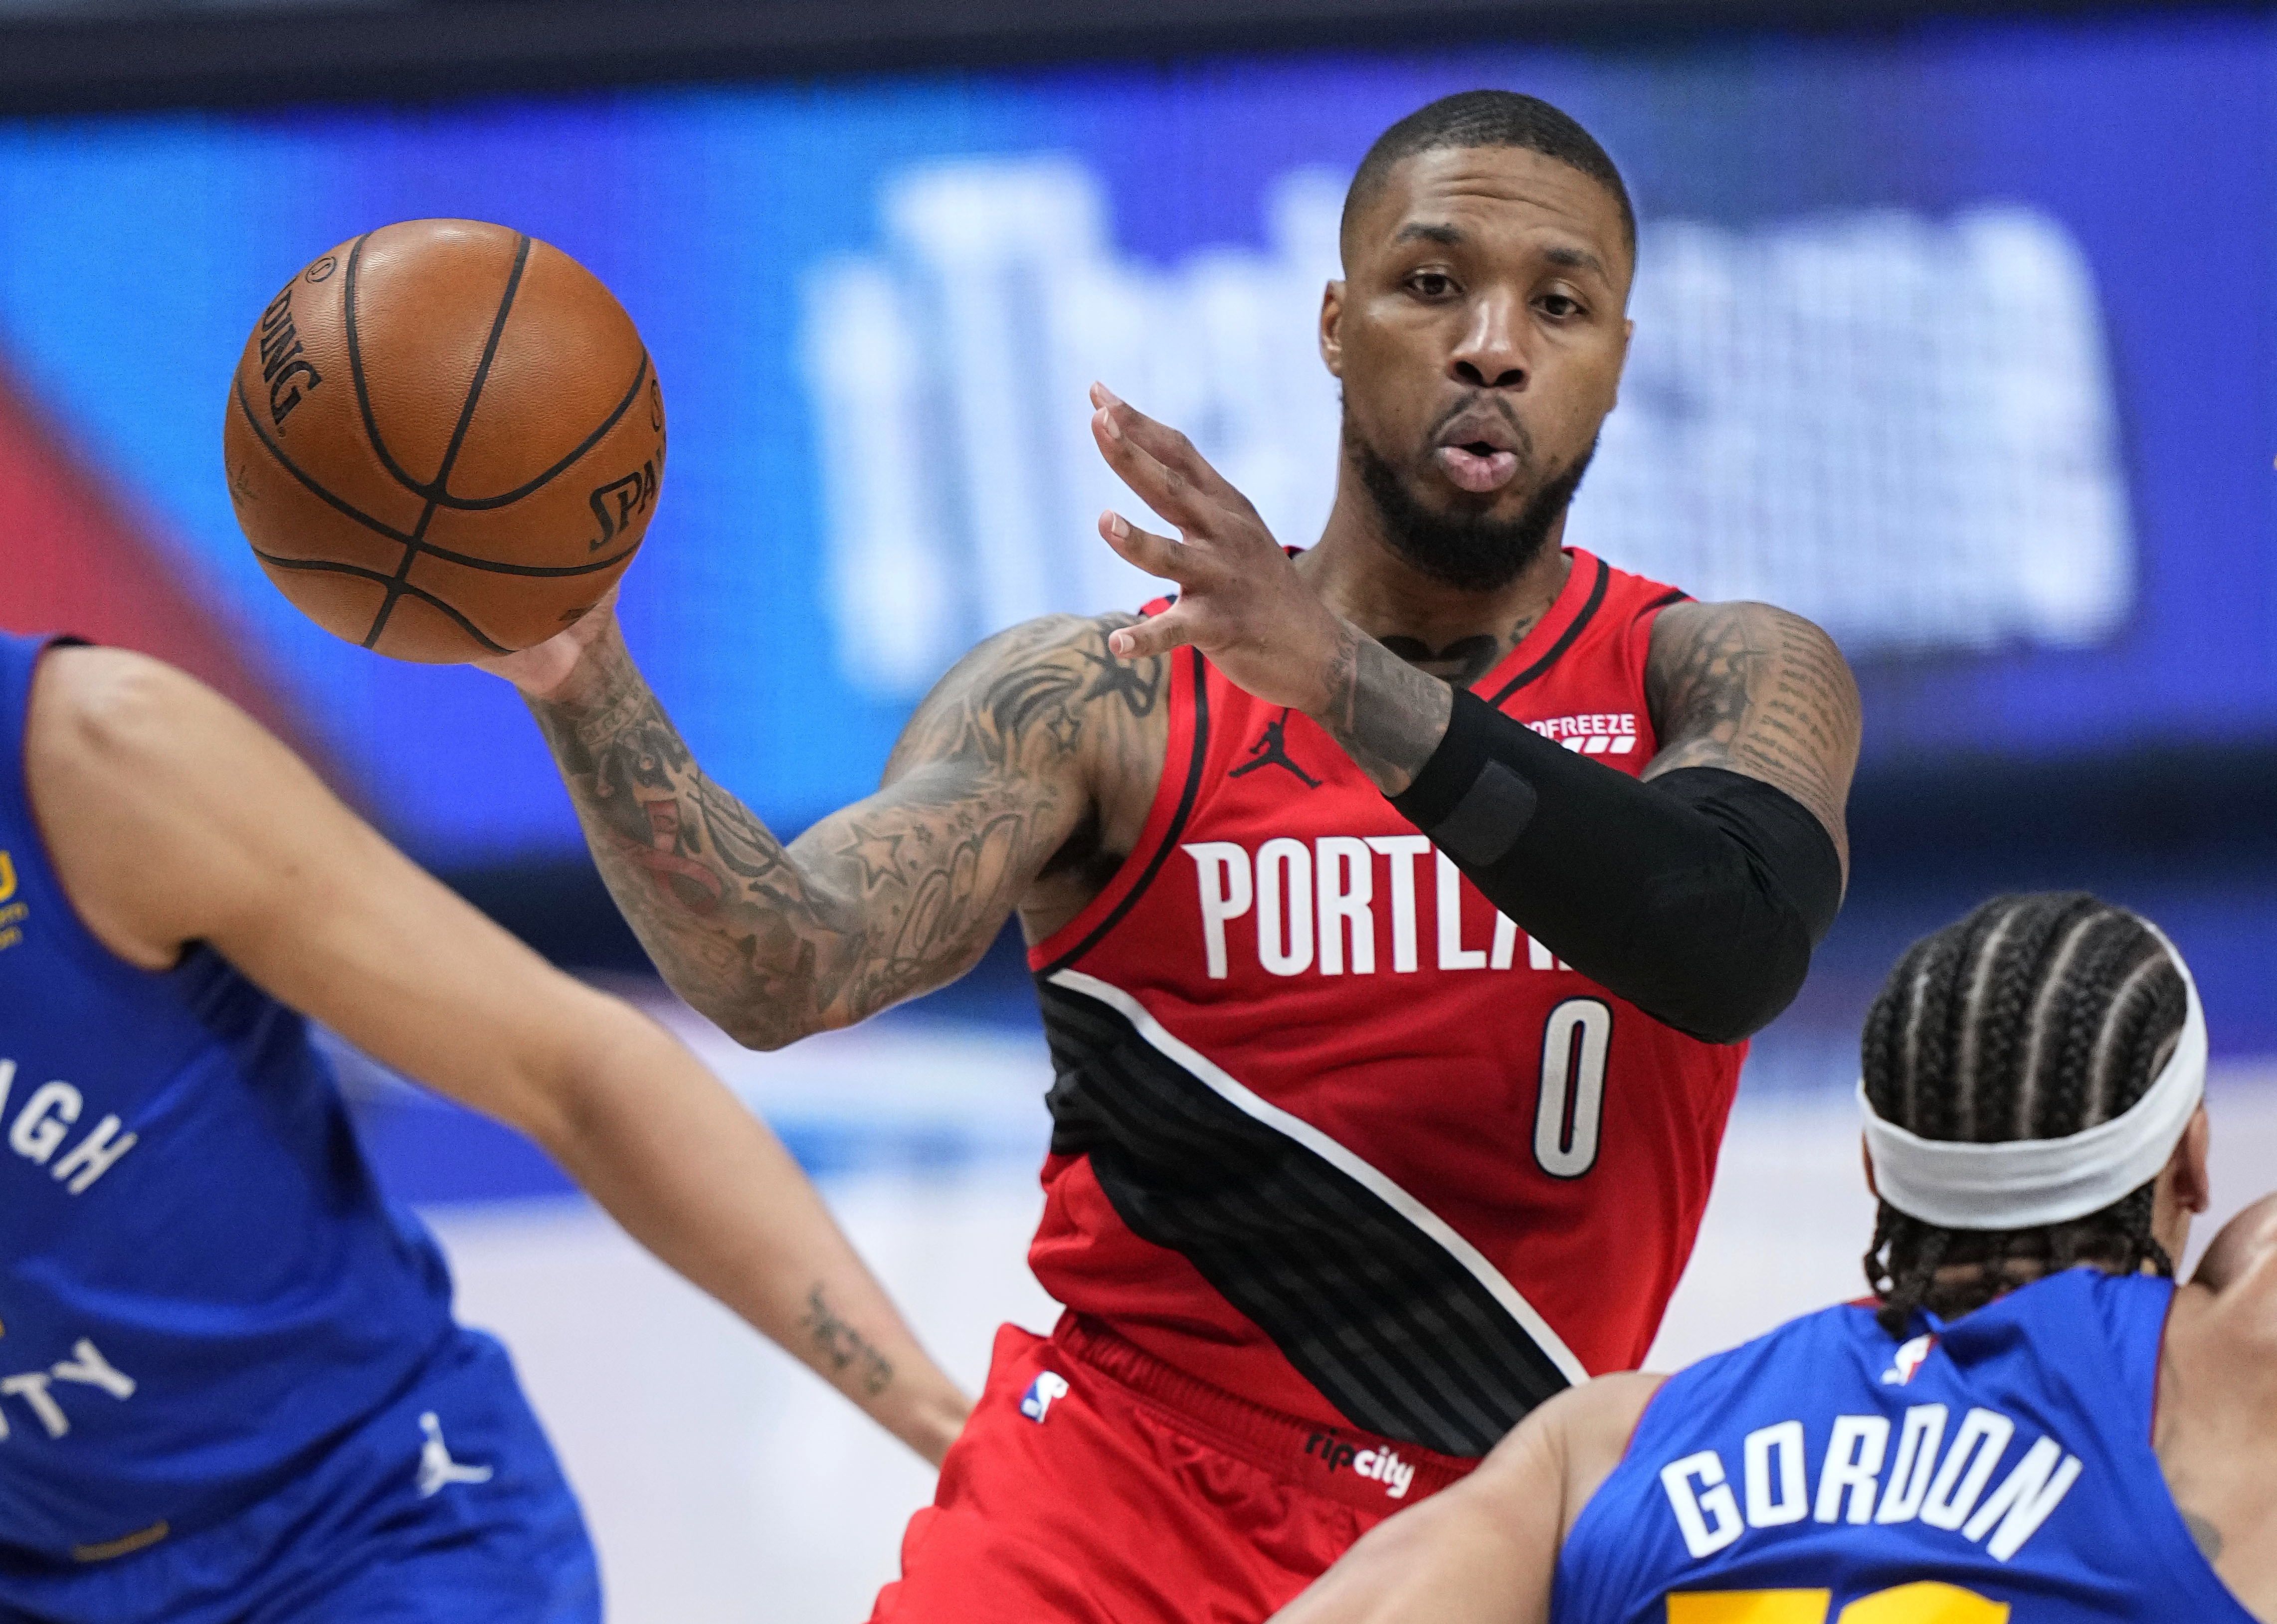 Damian Lillard's return to elite status a must and expected: Trail